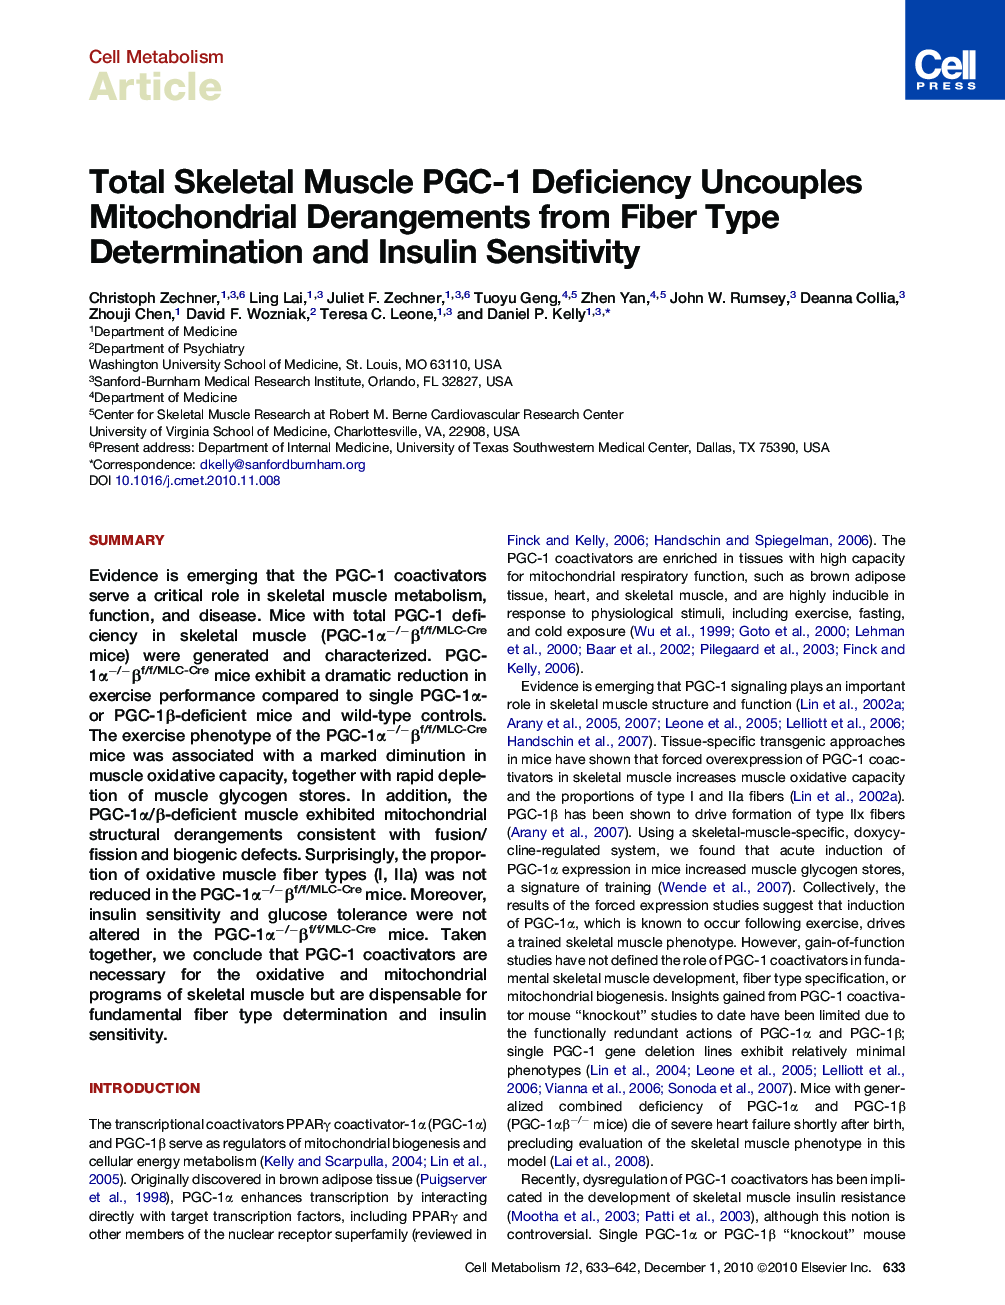 Total Skeletal Muscle PGC-1 Deficiency Uncouples Mitochondrial Derangements from Fiber Type Determination and Insulin Sensitivity